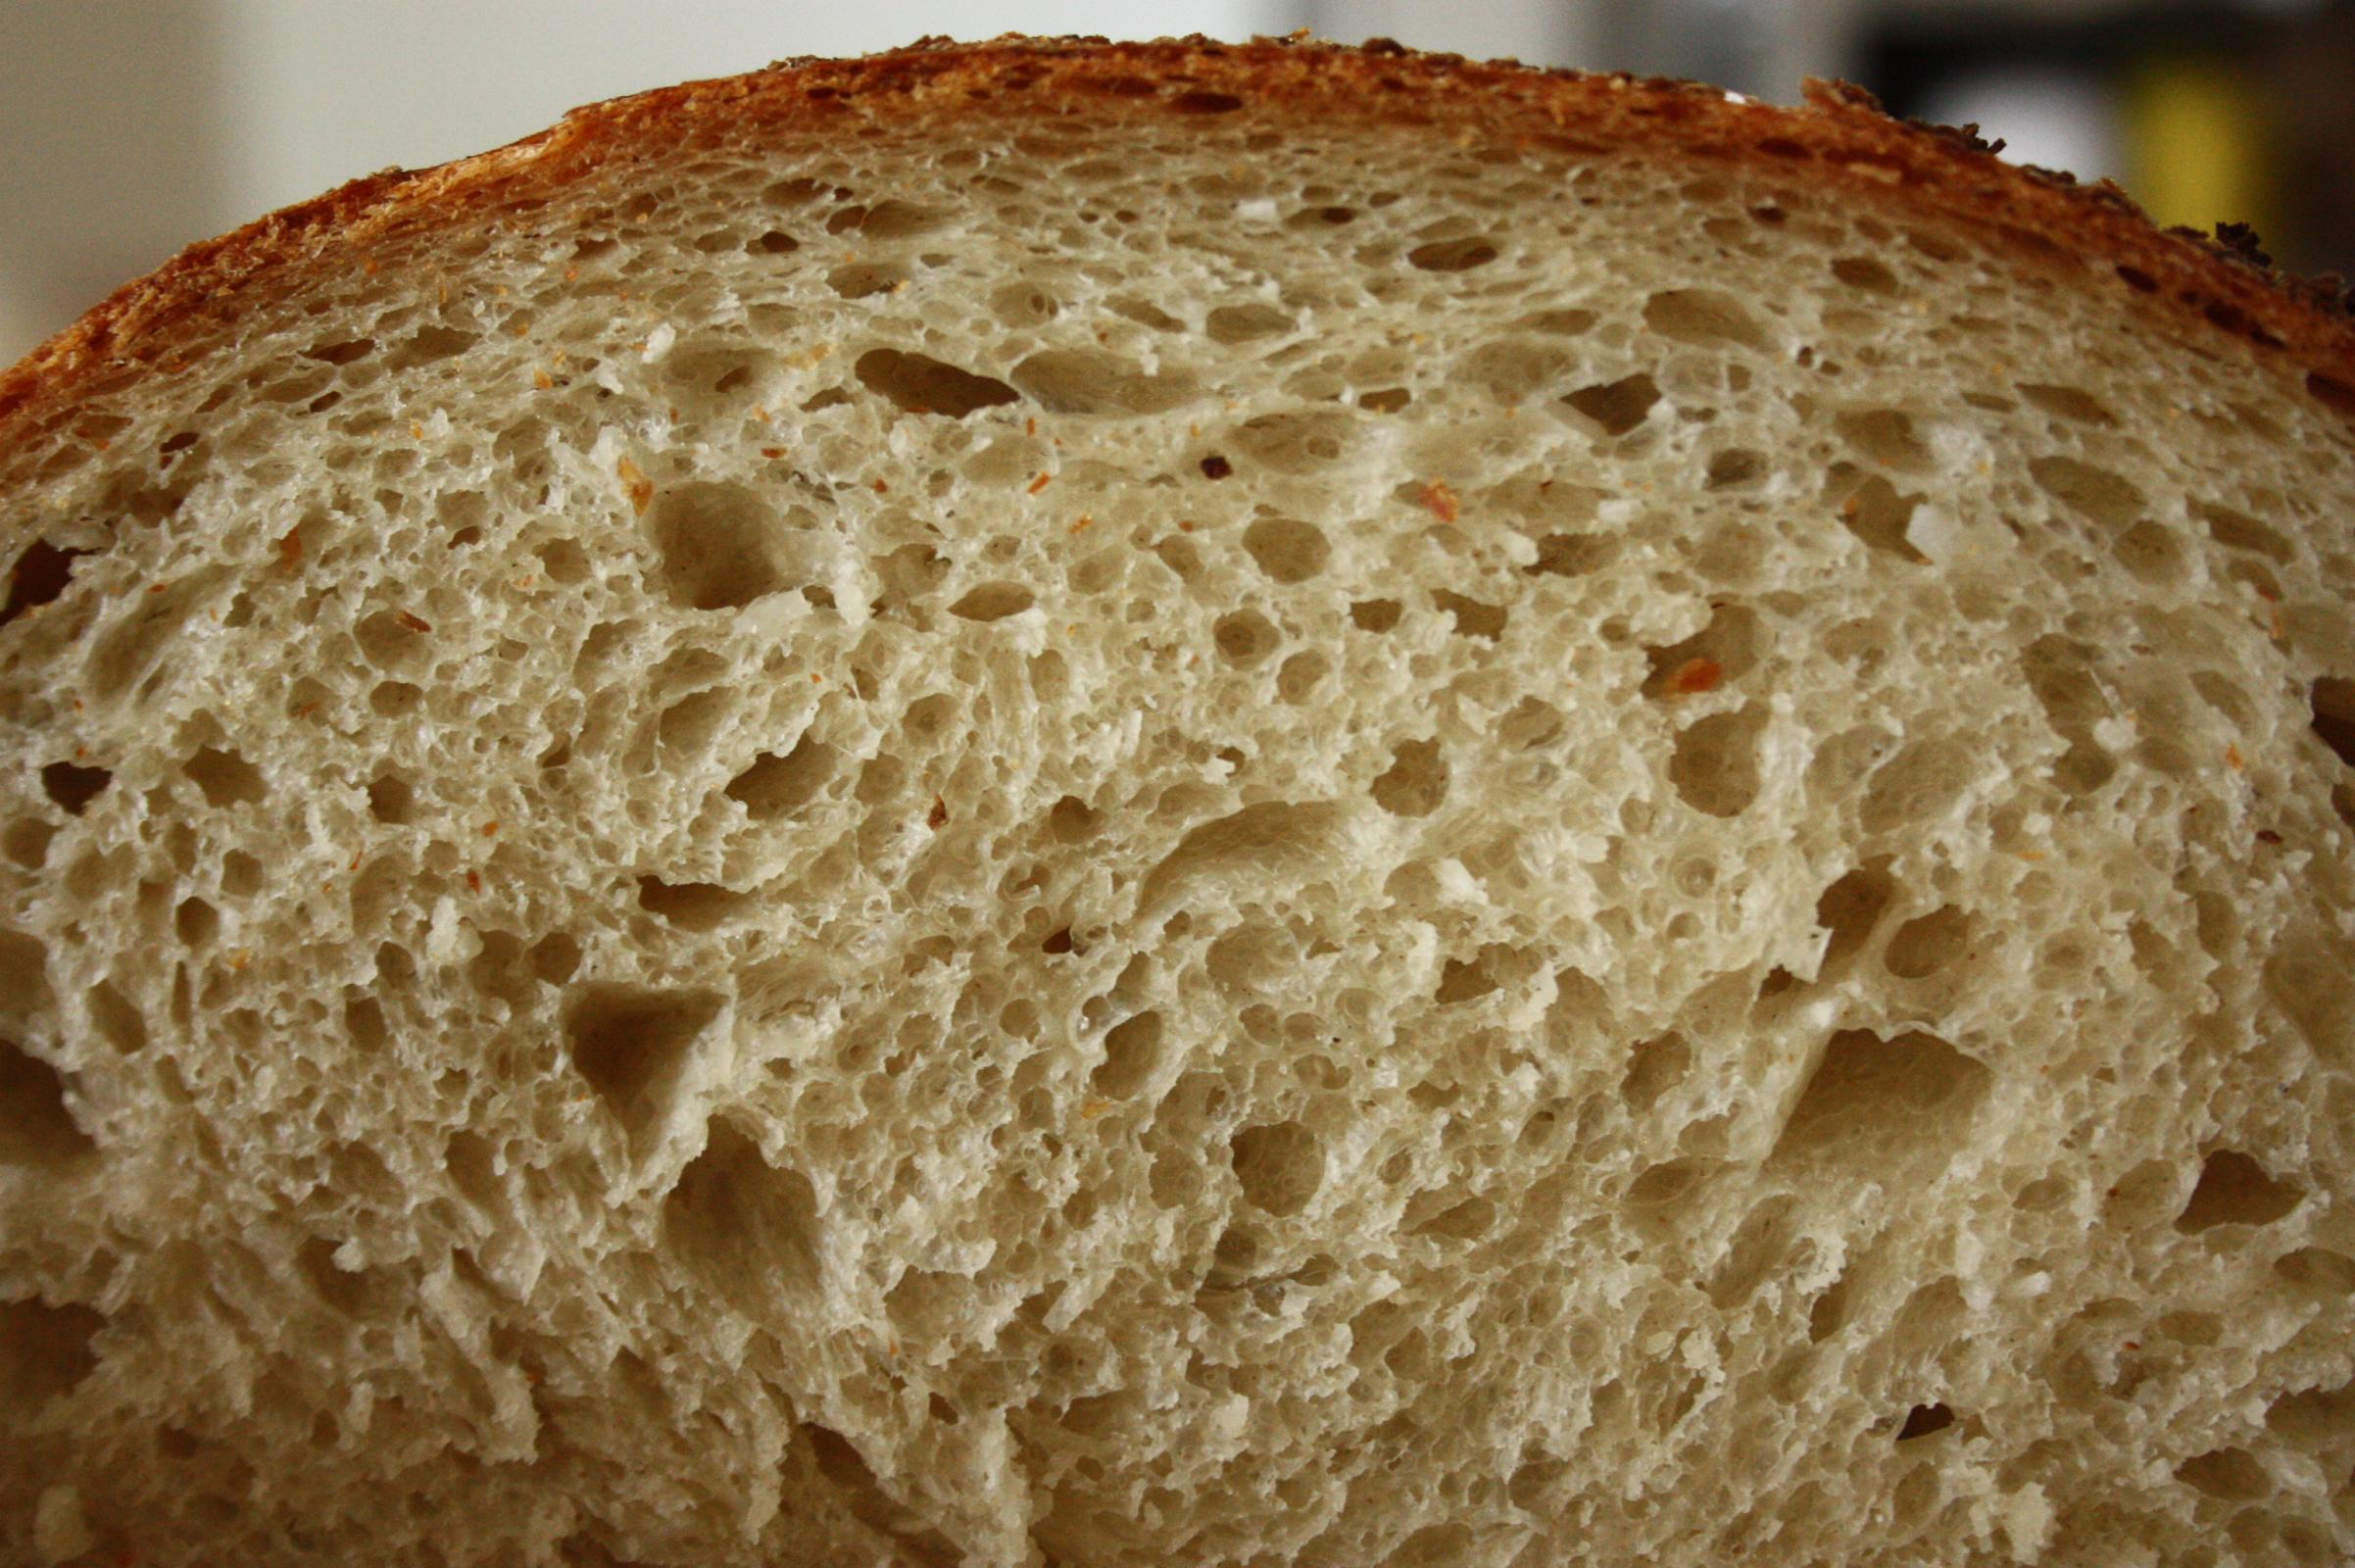 Crumb close up, natural light colour was a little more white than this